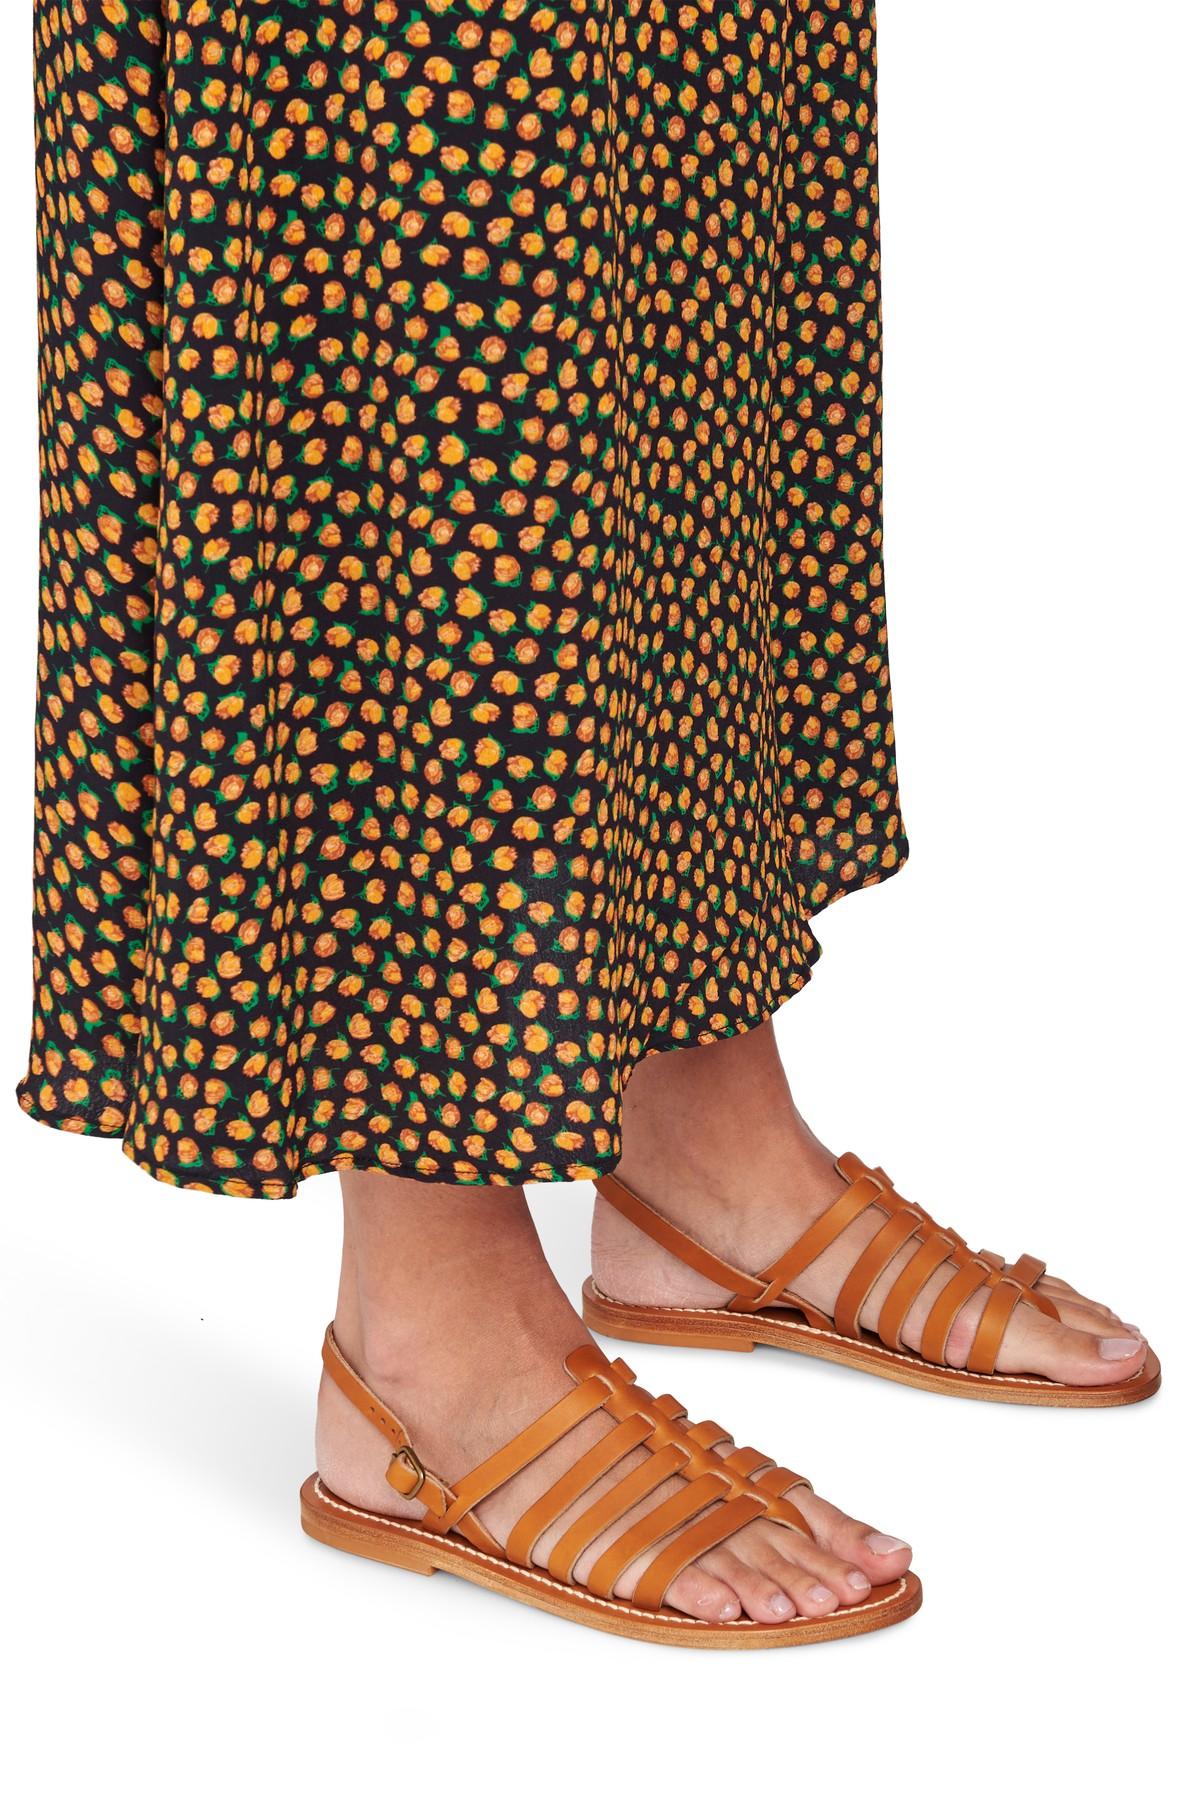 K. Jacques Homere Sandals in Brown - Lyst